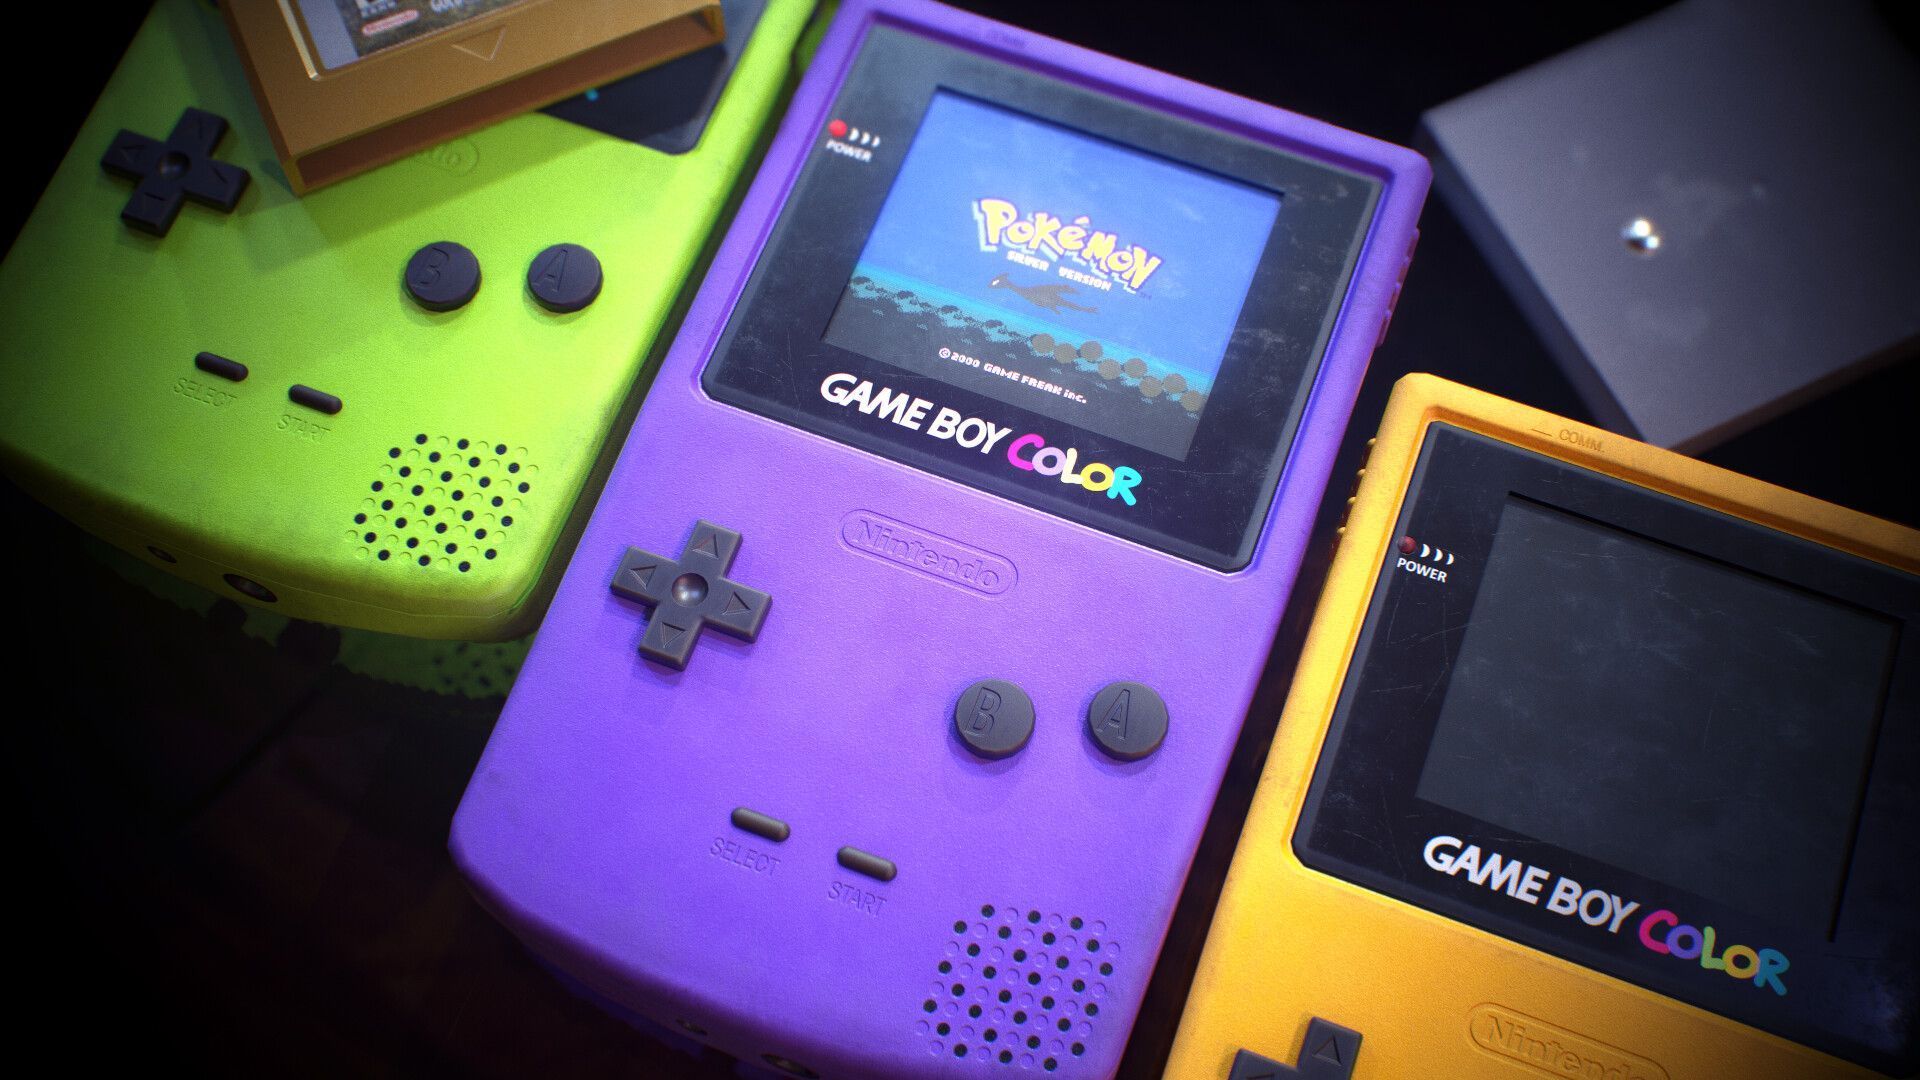 Gameboy Color Wallpapers - Top Free Gameboy Color Backgrounds ...